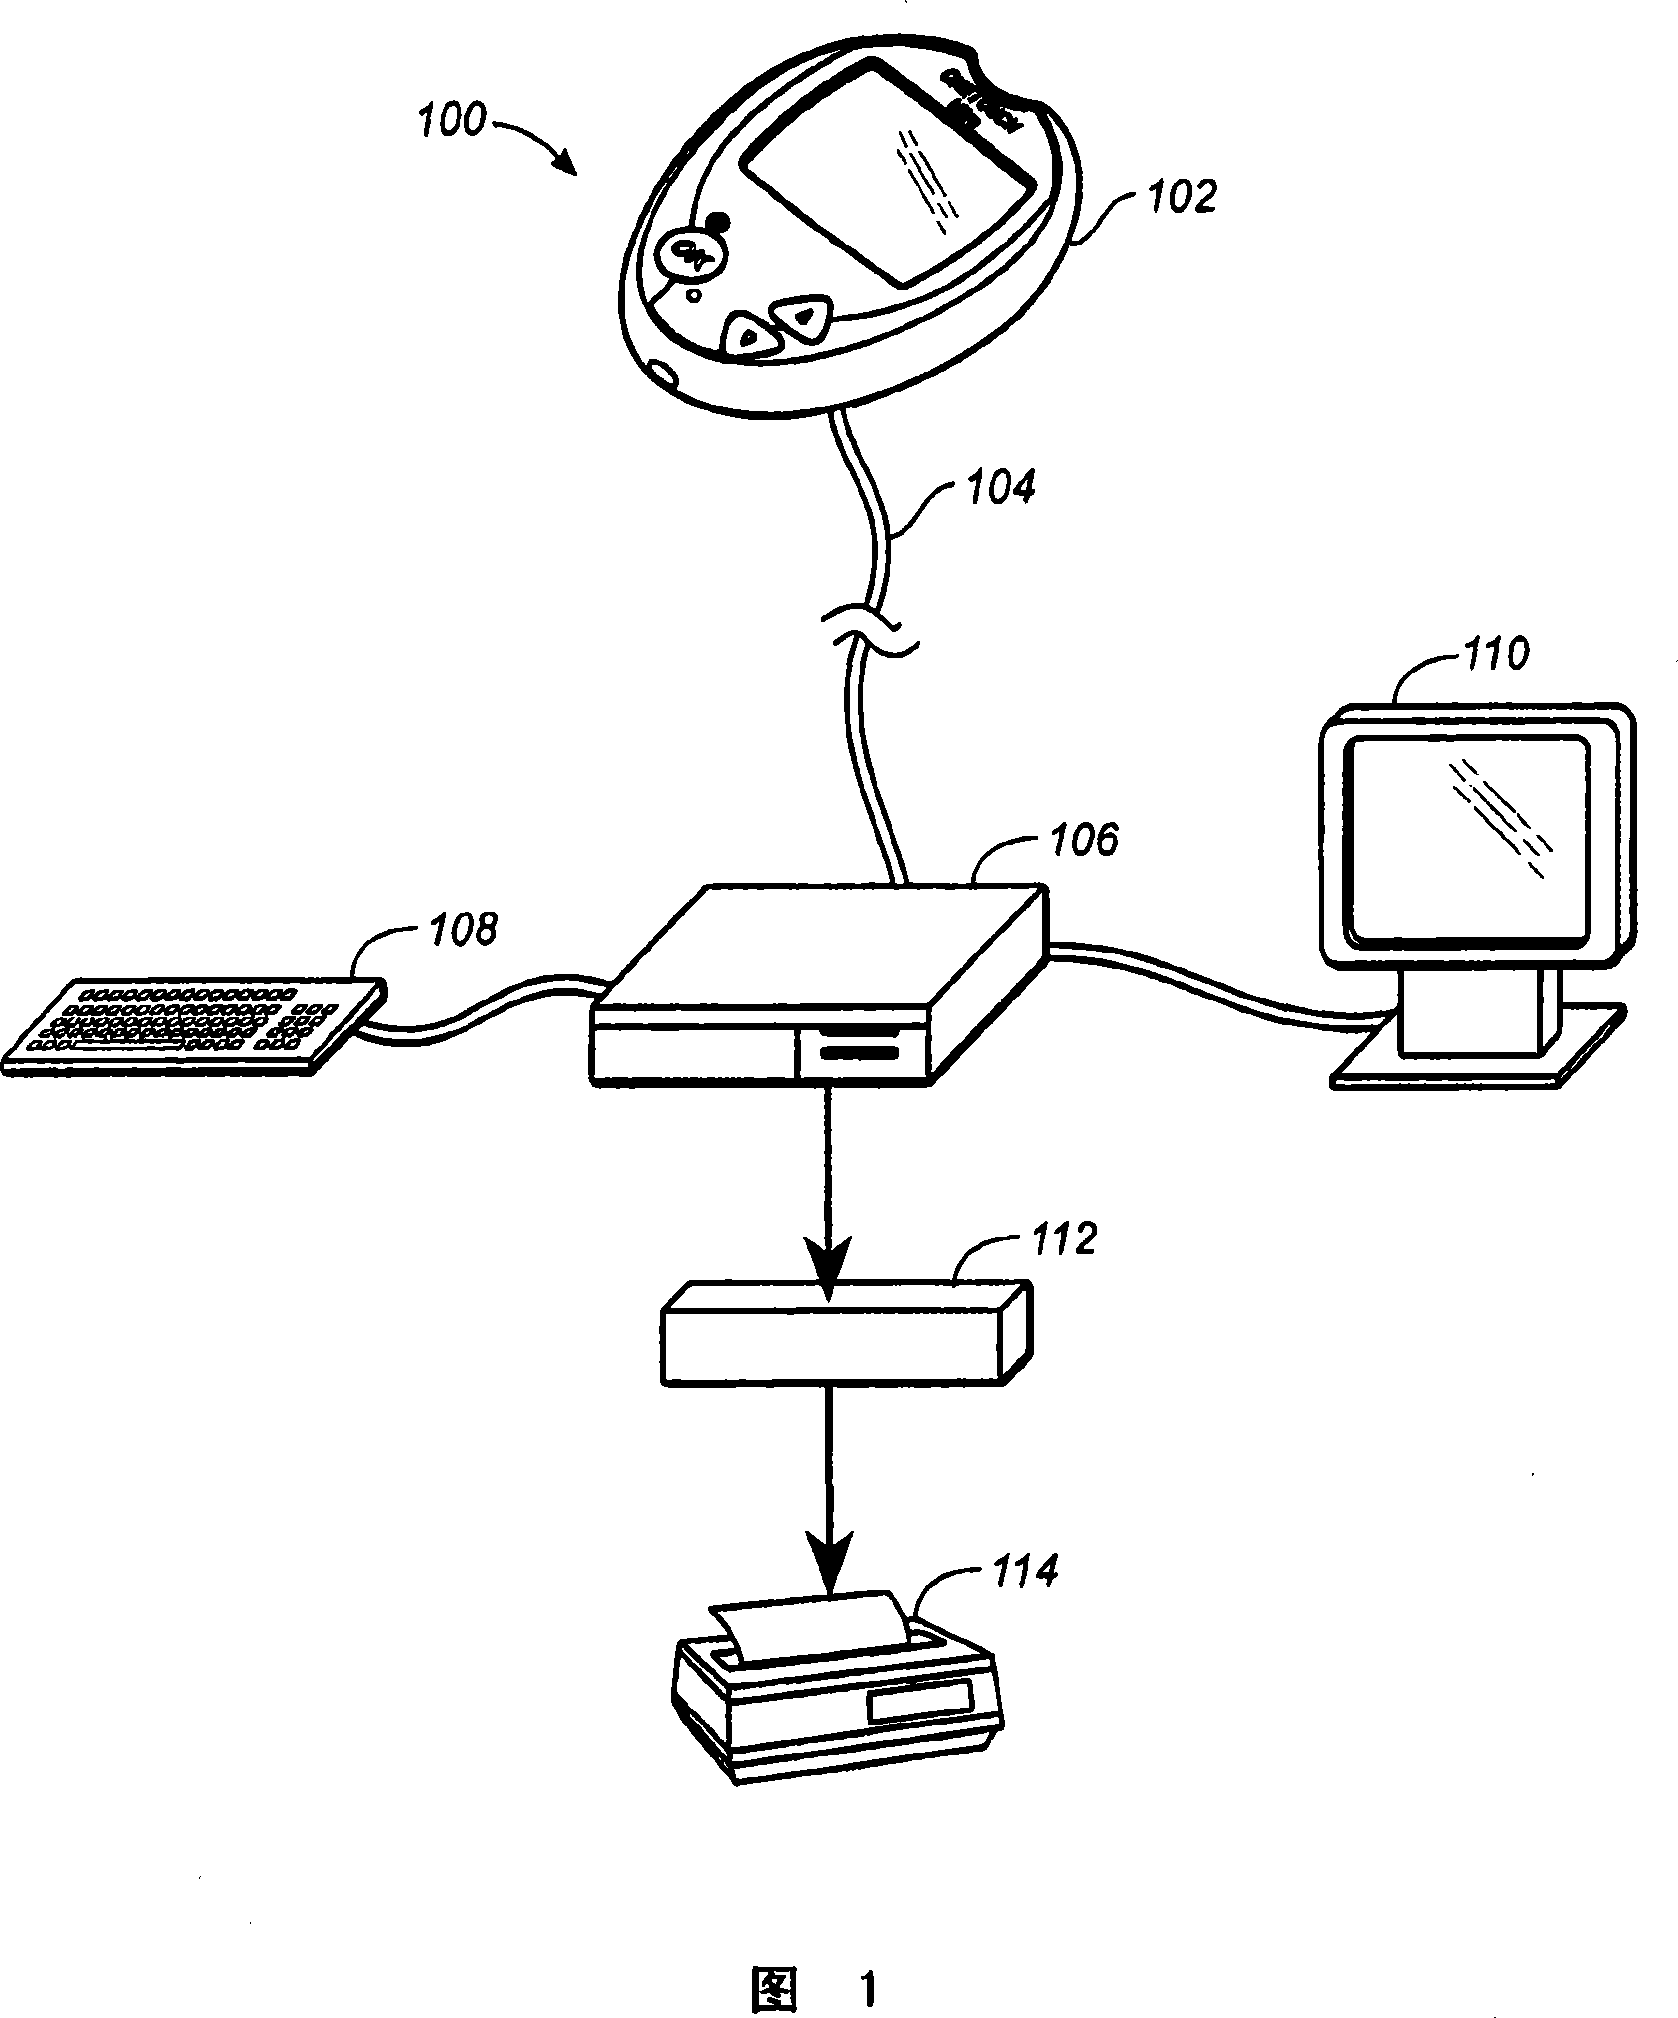 Systems and methods for providing individualized disease management